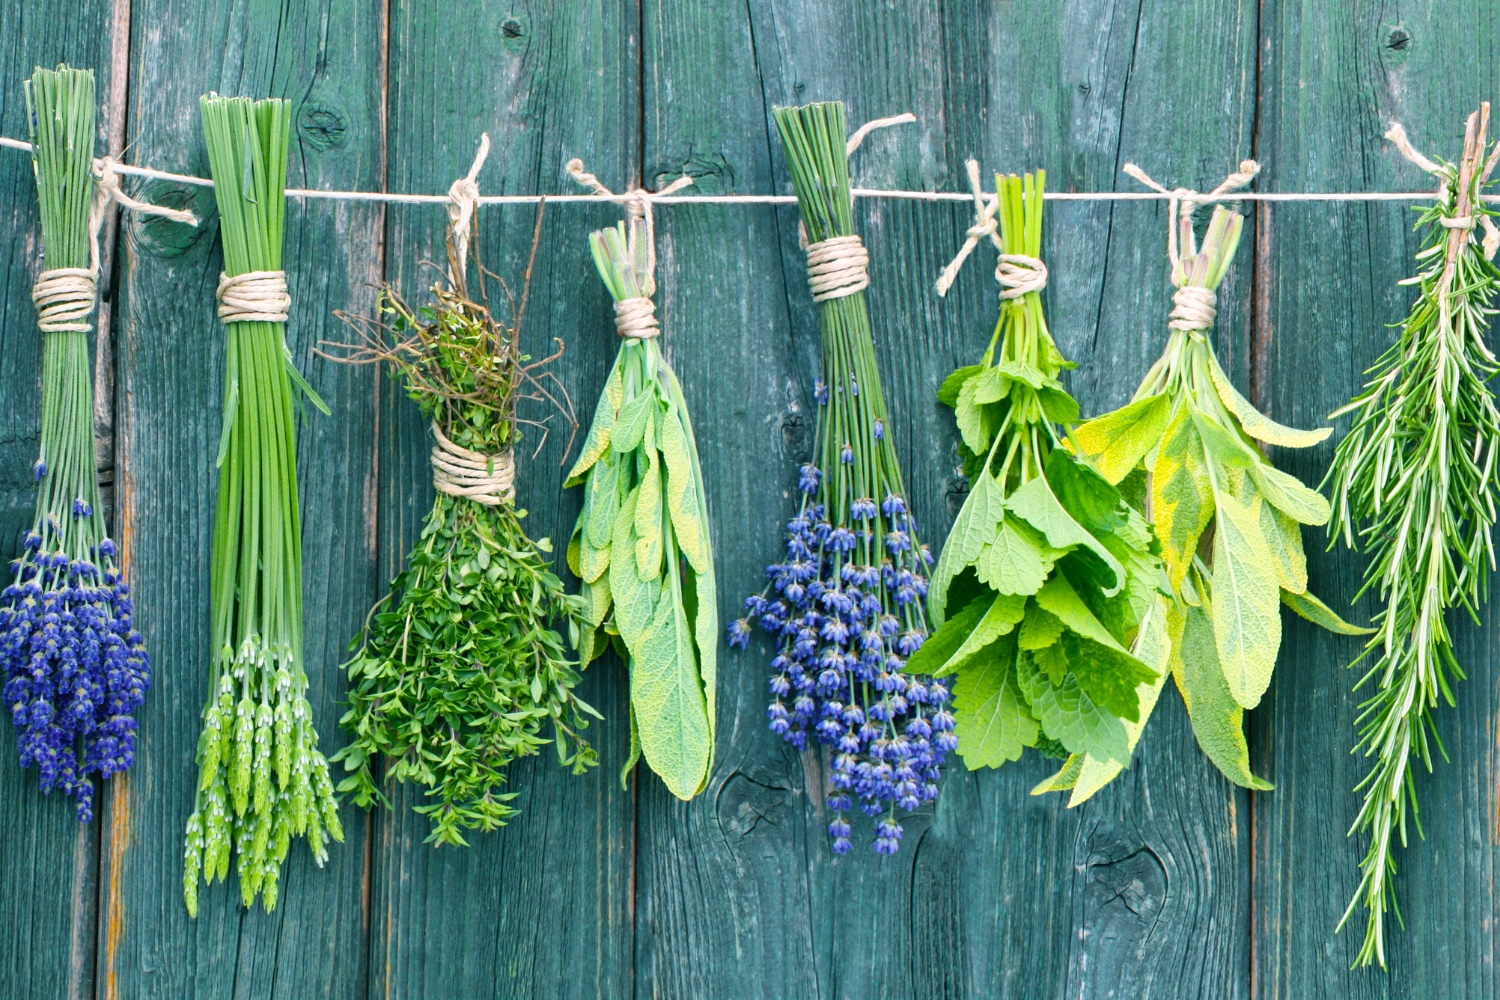 A Deep Dive into What Herbs Are Used For and Their Main Applications